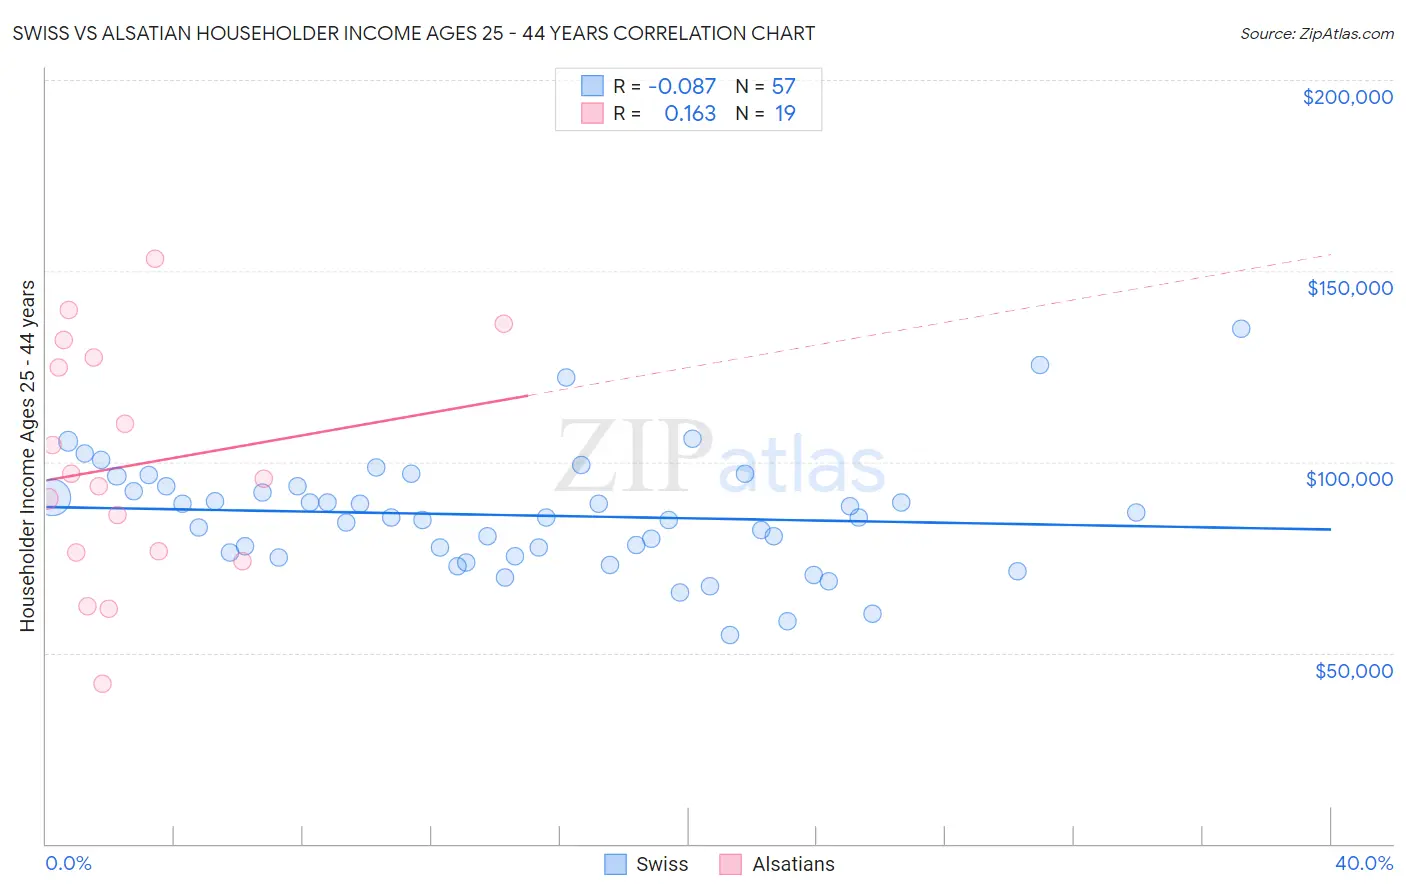 Swiss vs Alsatian Householder Income Ages 25 - 44 years